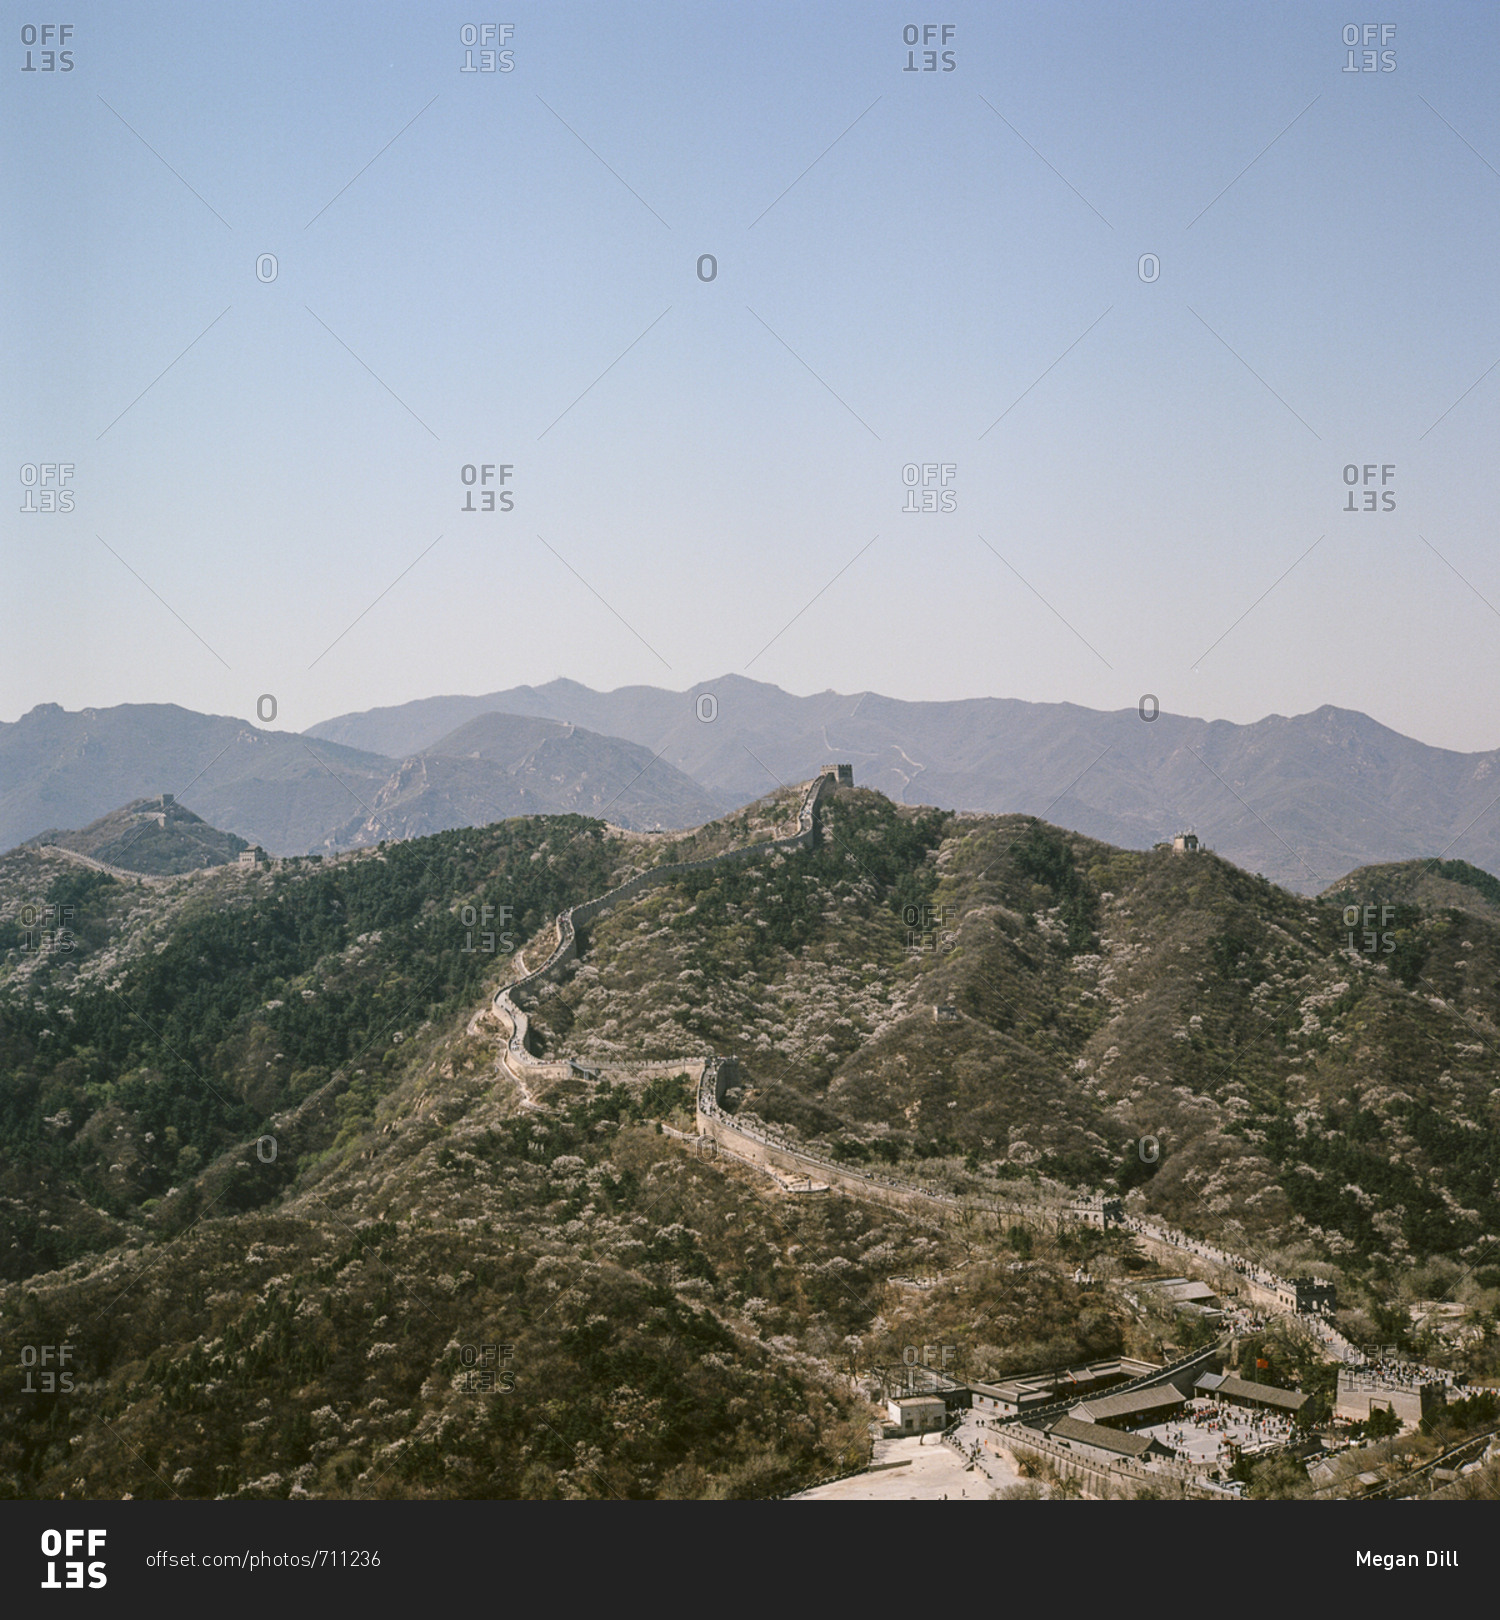 Panoramic view of great wall of China snaking over hills